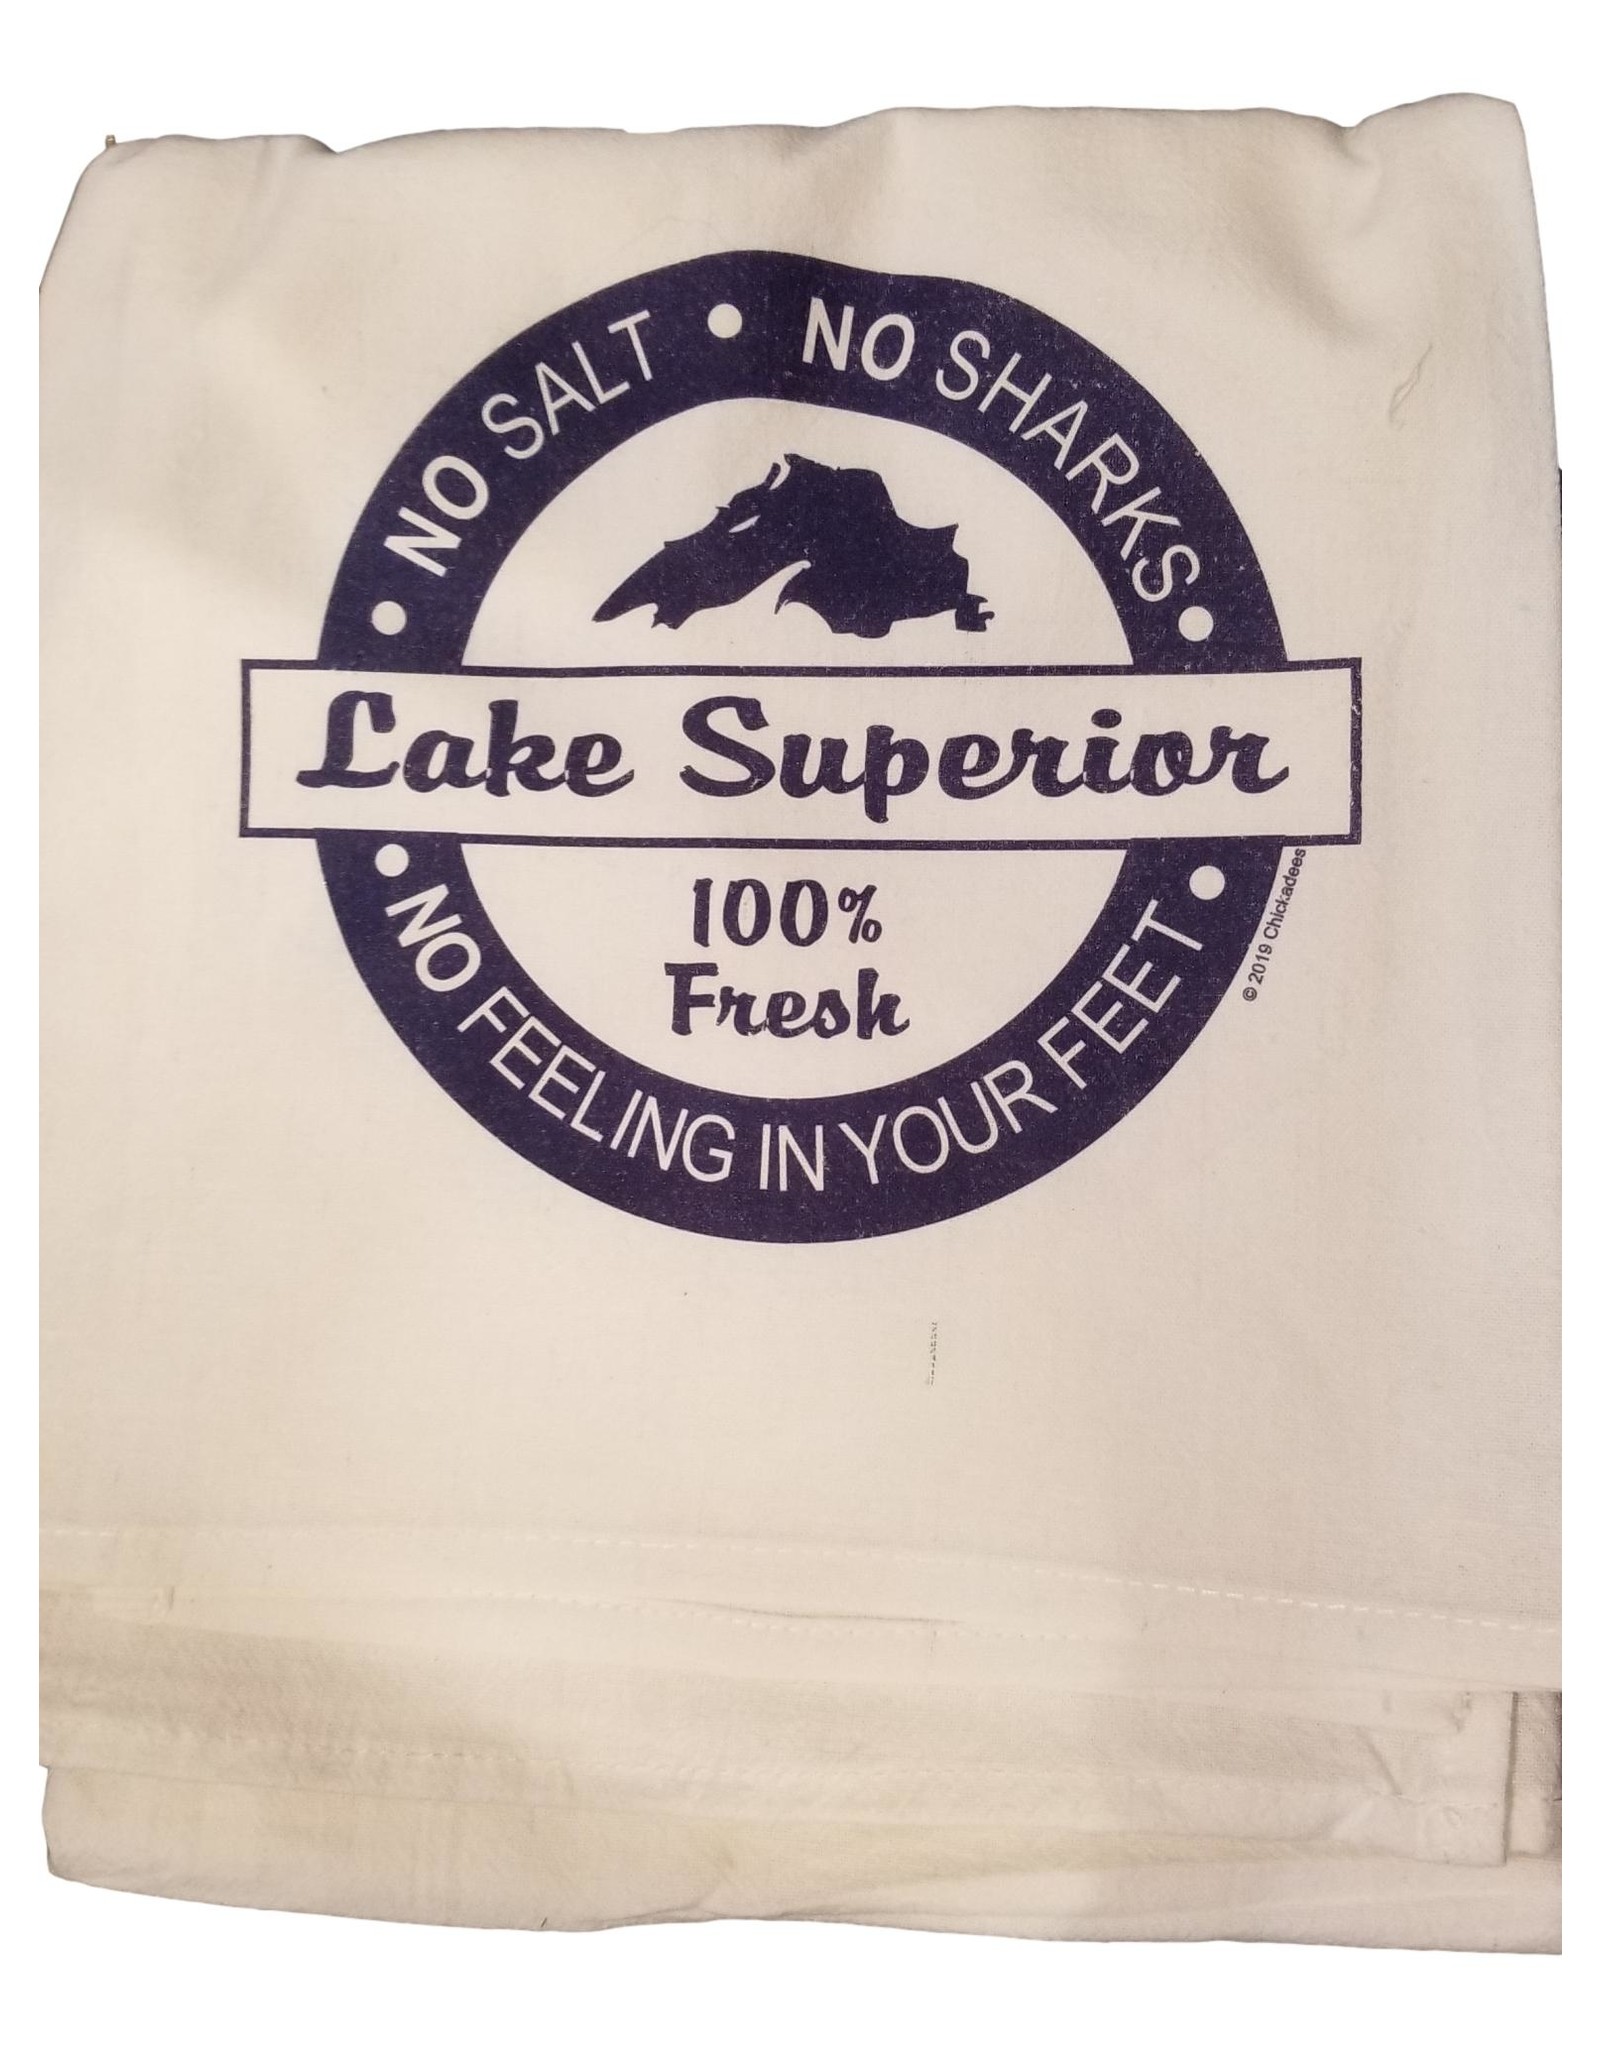 MONKEY BUSINESS Lake Superior - No Feeling in Your Feet Towel